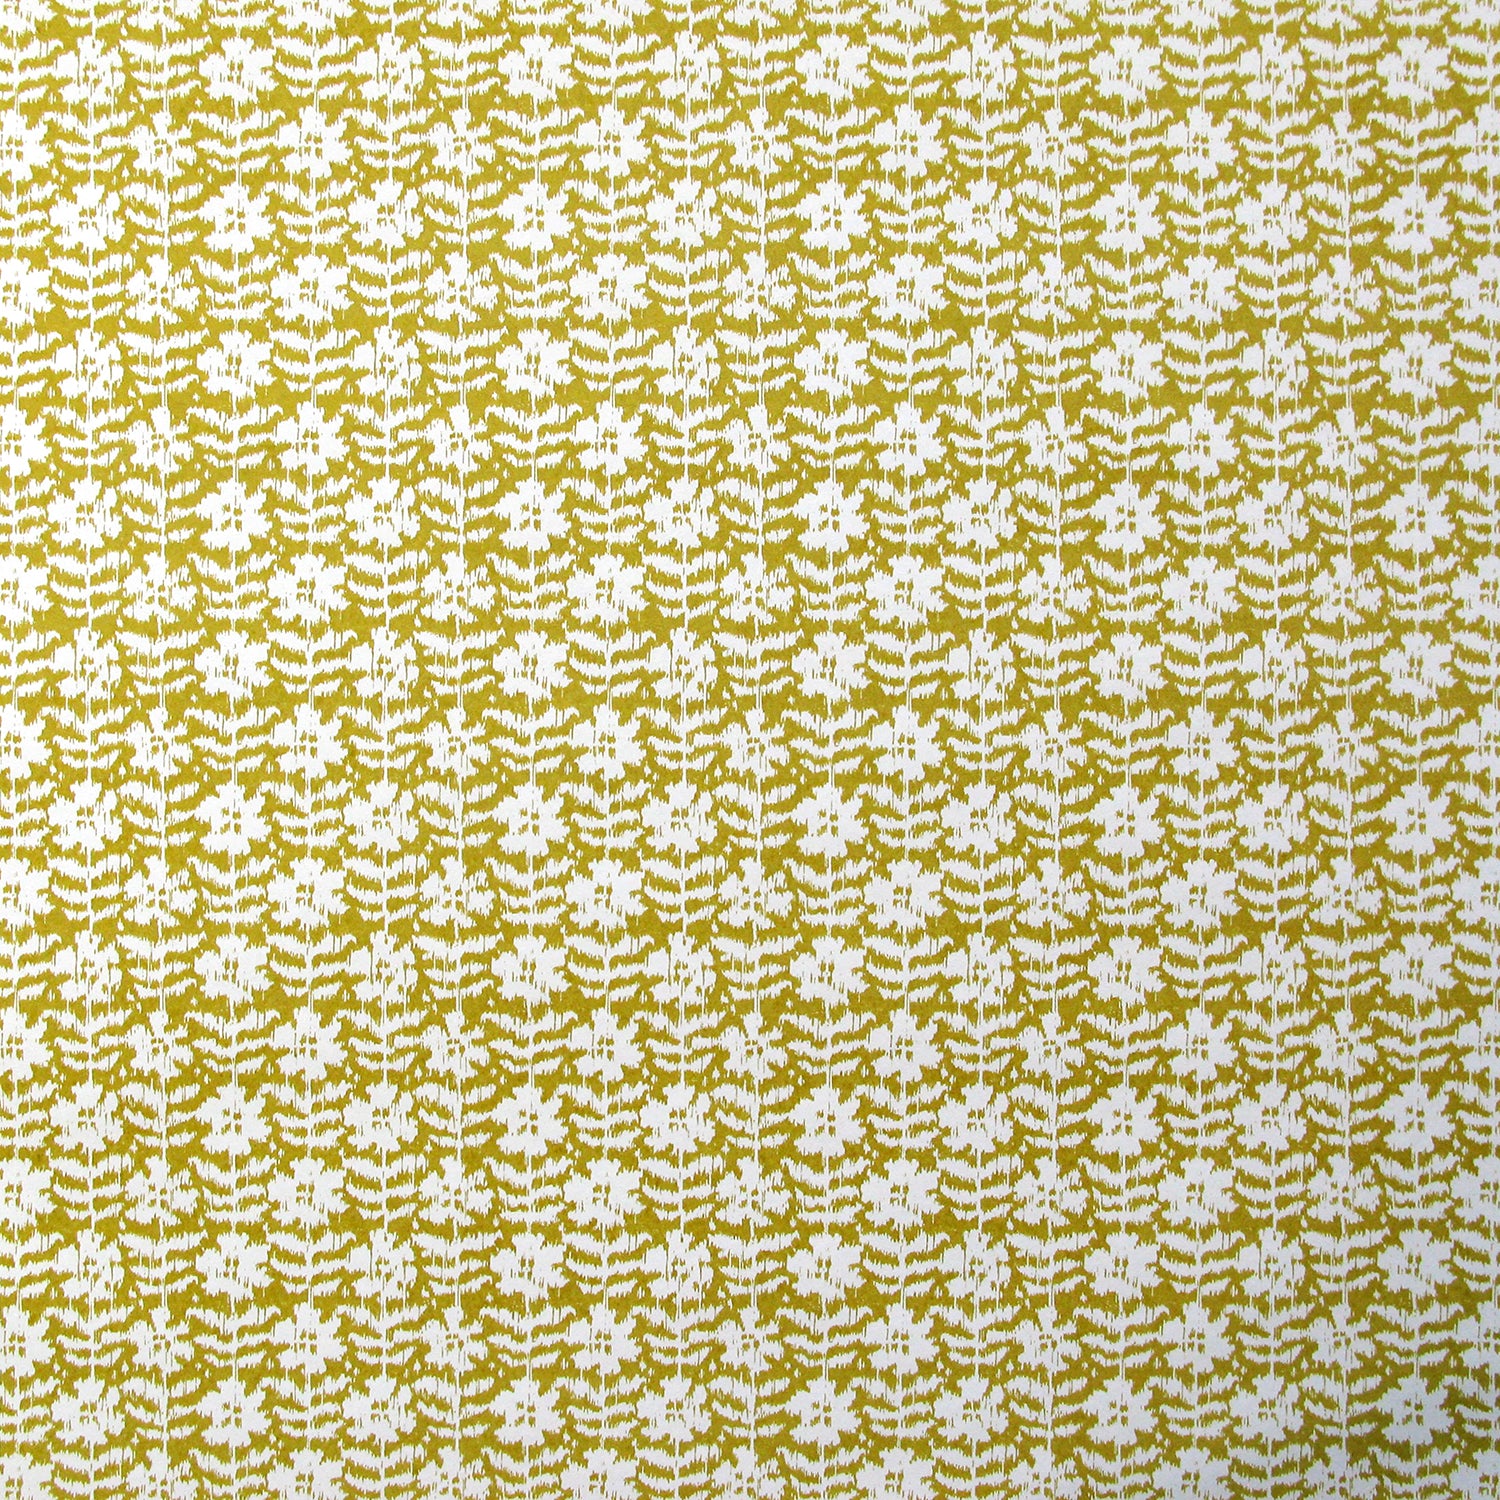 Detail of wallpaper in a floral grid print in white on a mustard field.